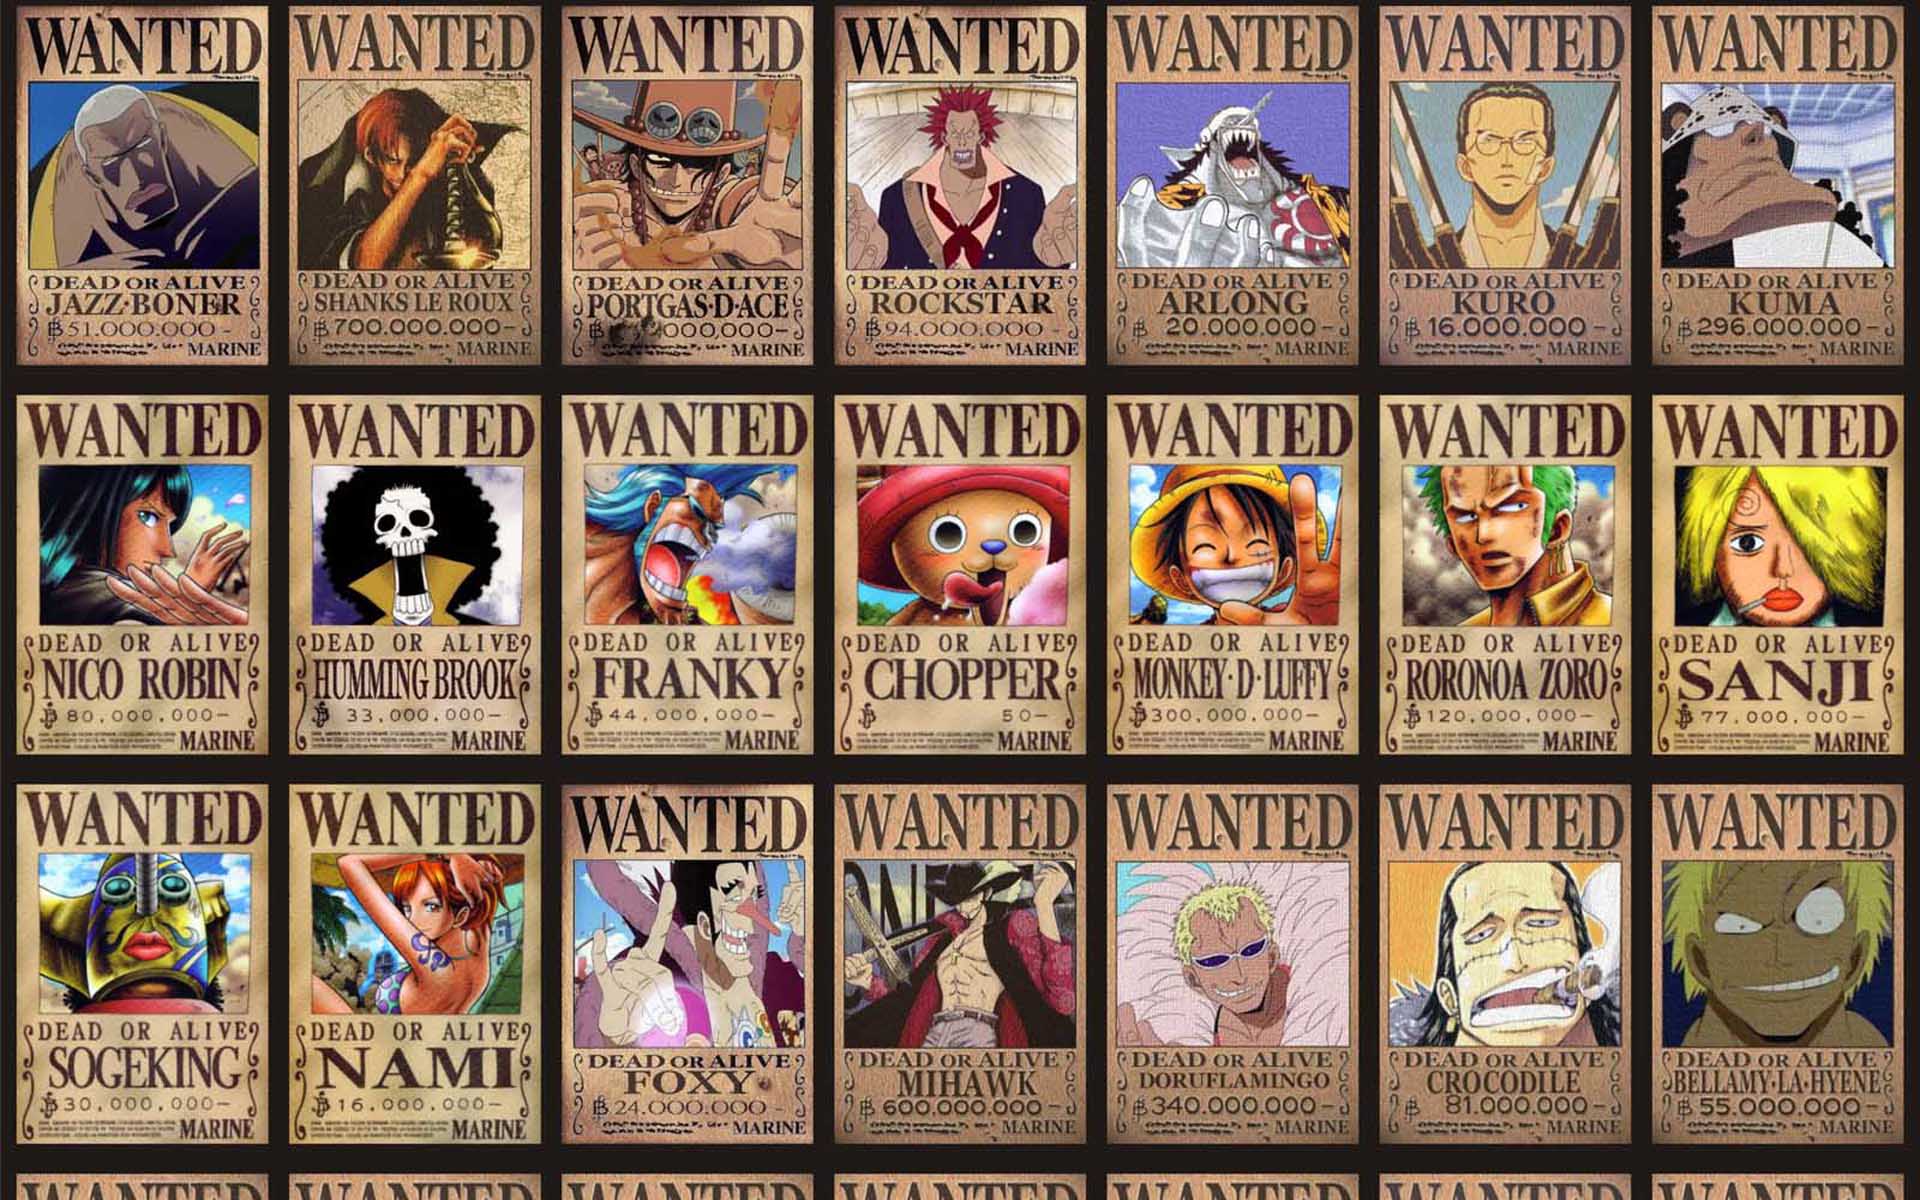 One Piece Wanted Posters HD Wallpaper.